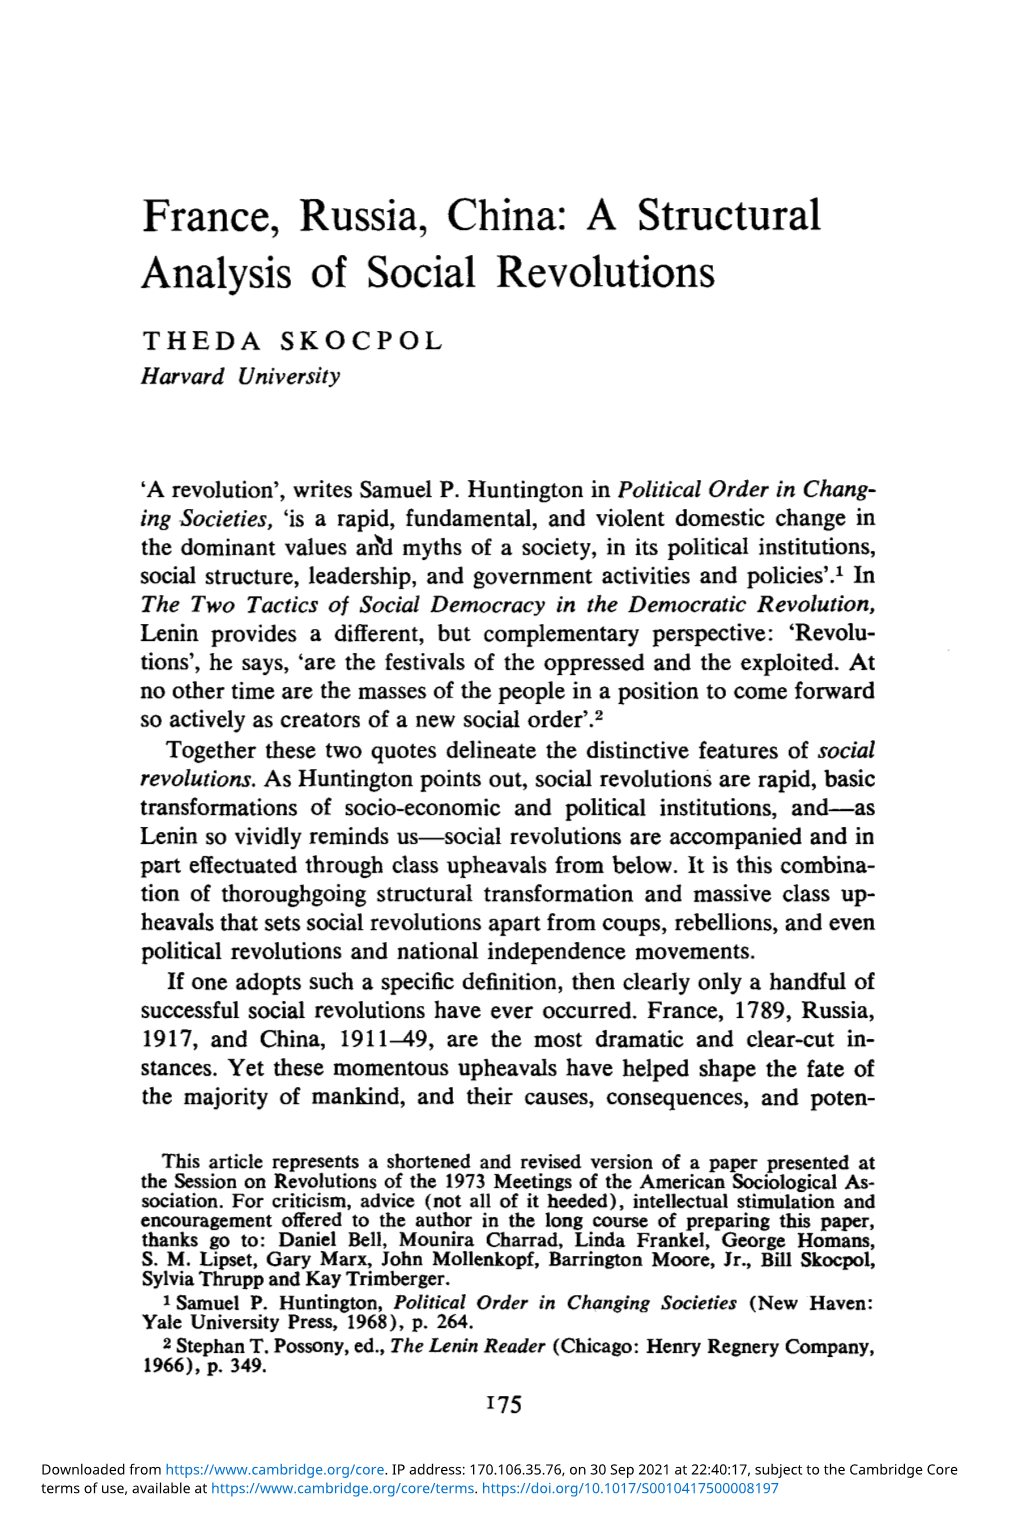 France, Russia, China: a Structural Analysis of Social Revolutions